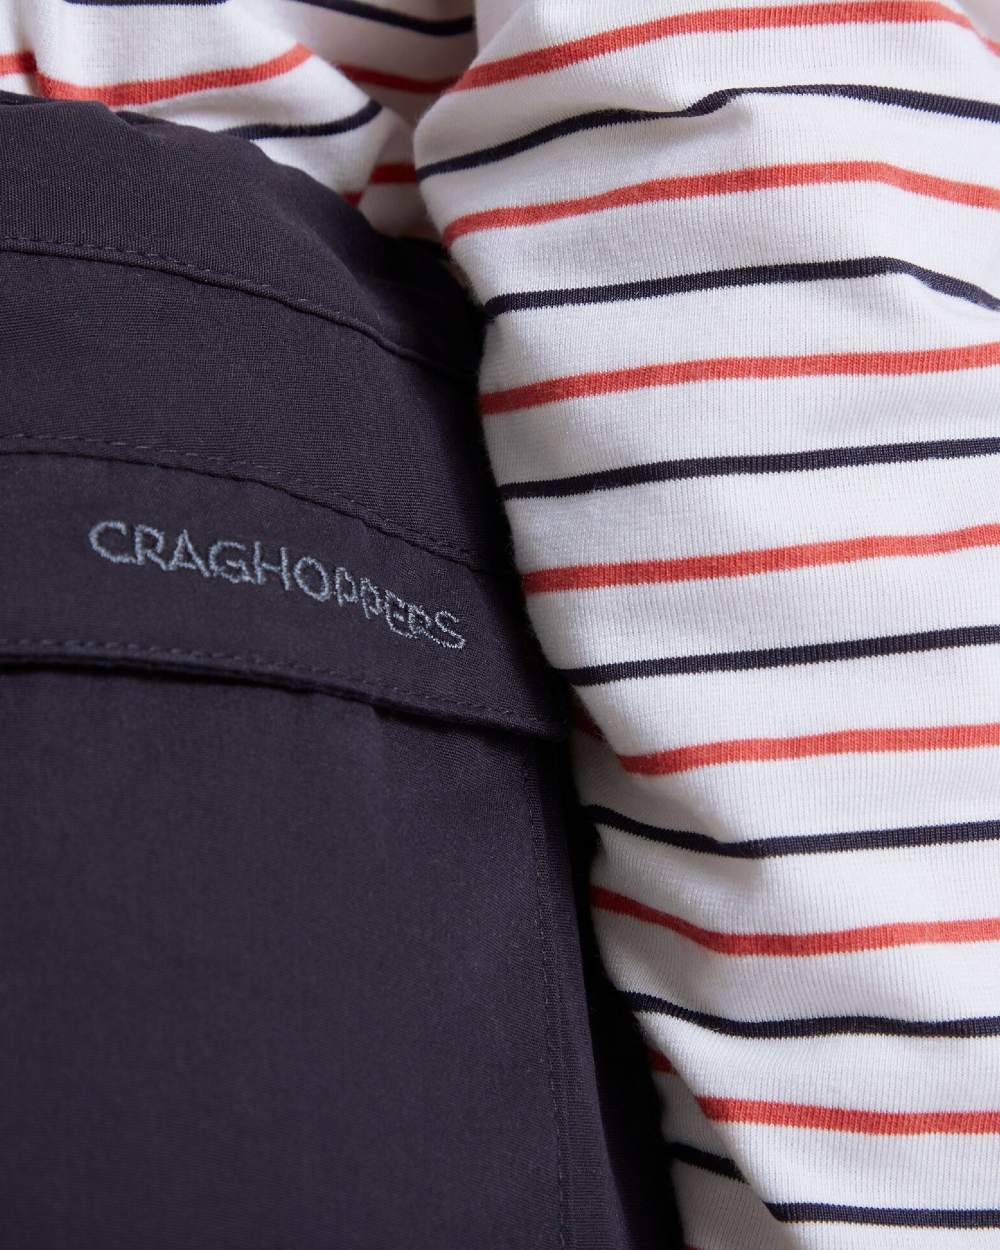 Dark Navy Coloured Craghoppers Childrens Kiwi II Trousers On A White Background 